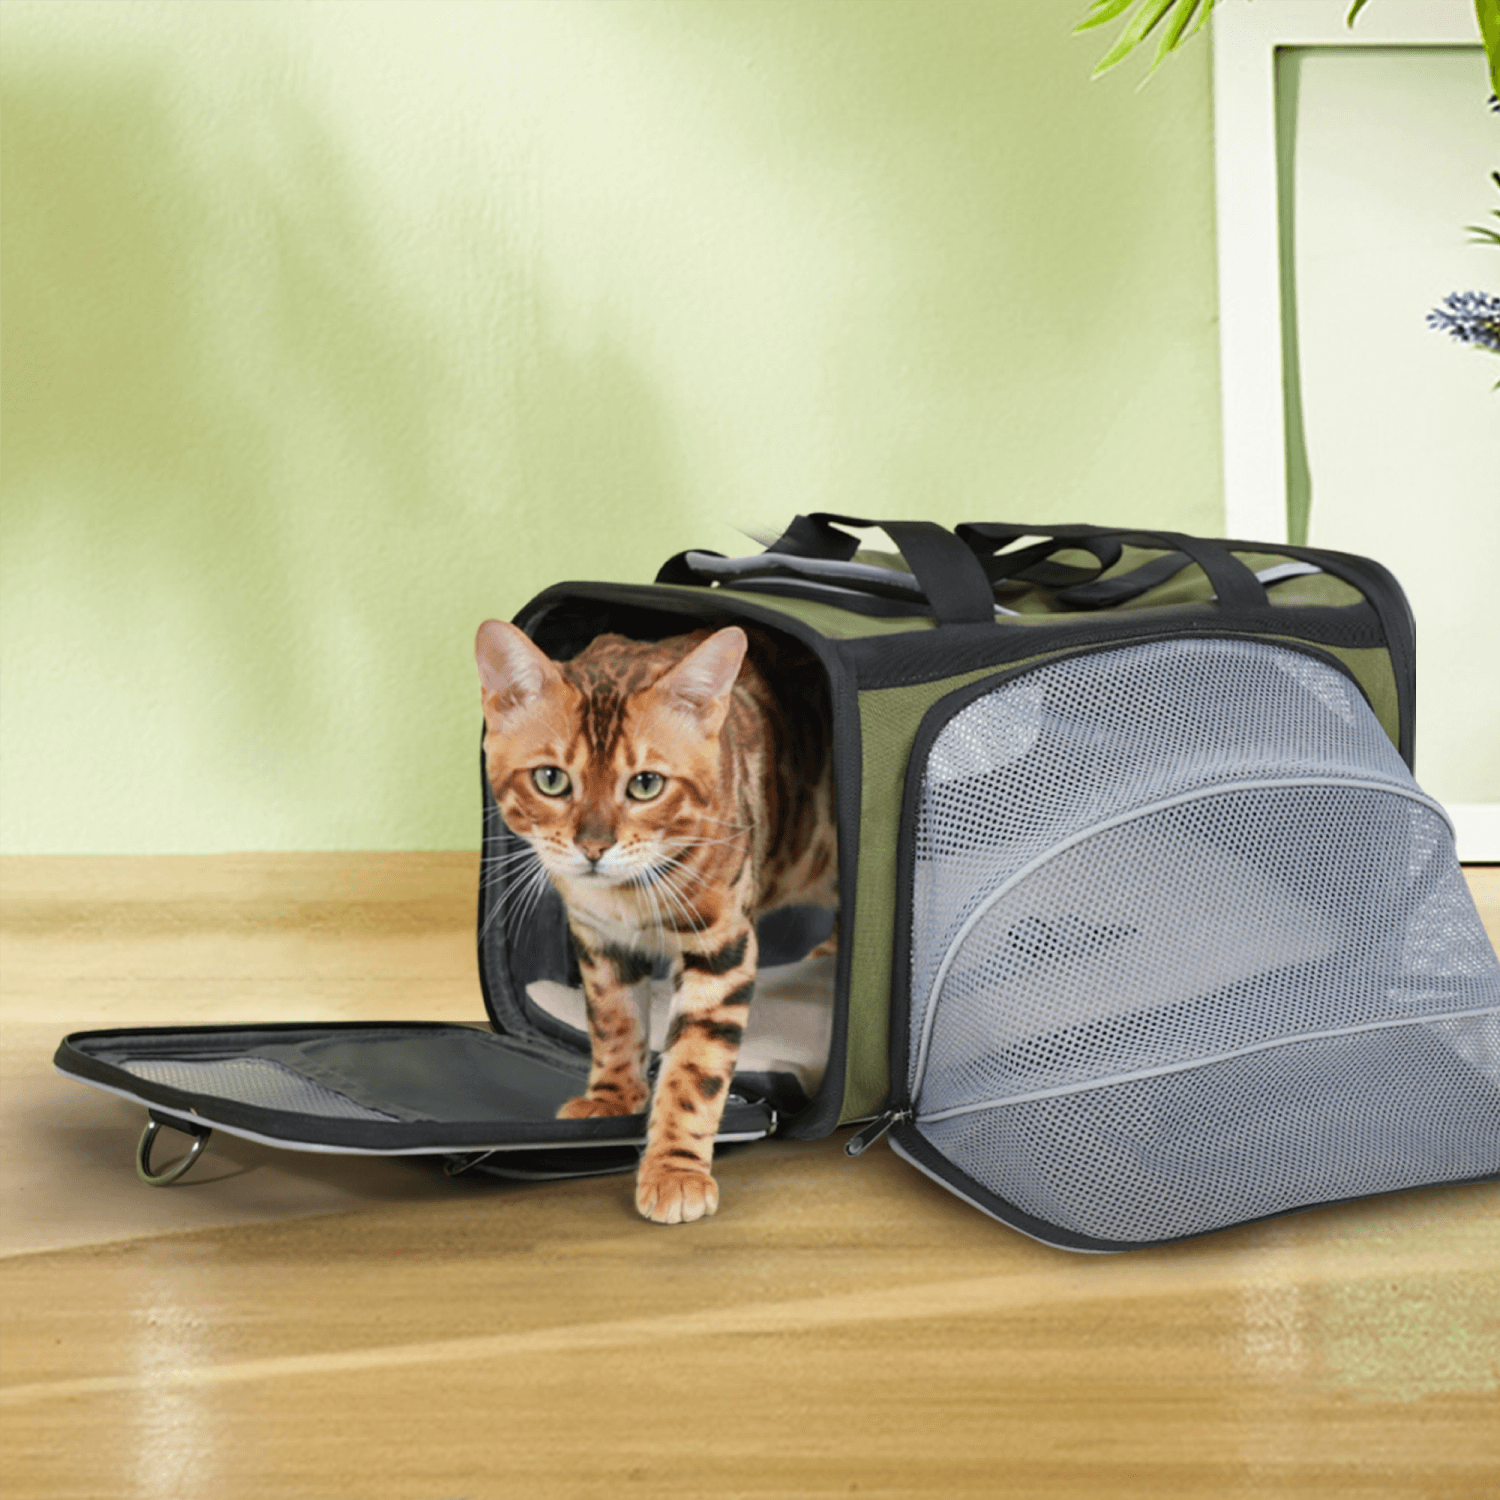 Prodigen Pet Carrier Airline Approved Pet Carrier Dog Carriers for Small Dogs, Cat Carriers for Medium Cats Small Cats, Small